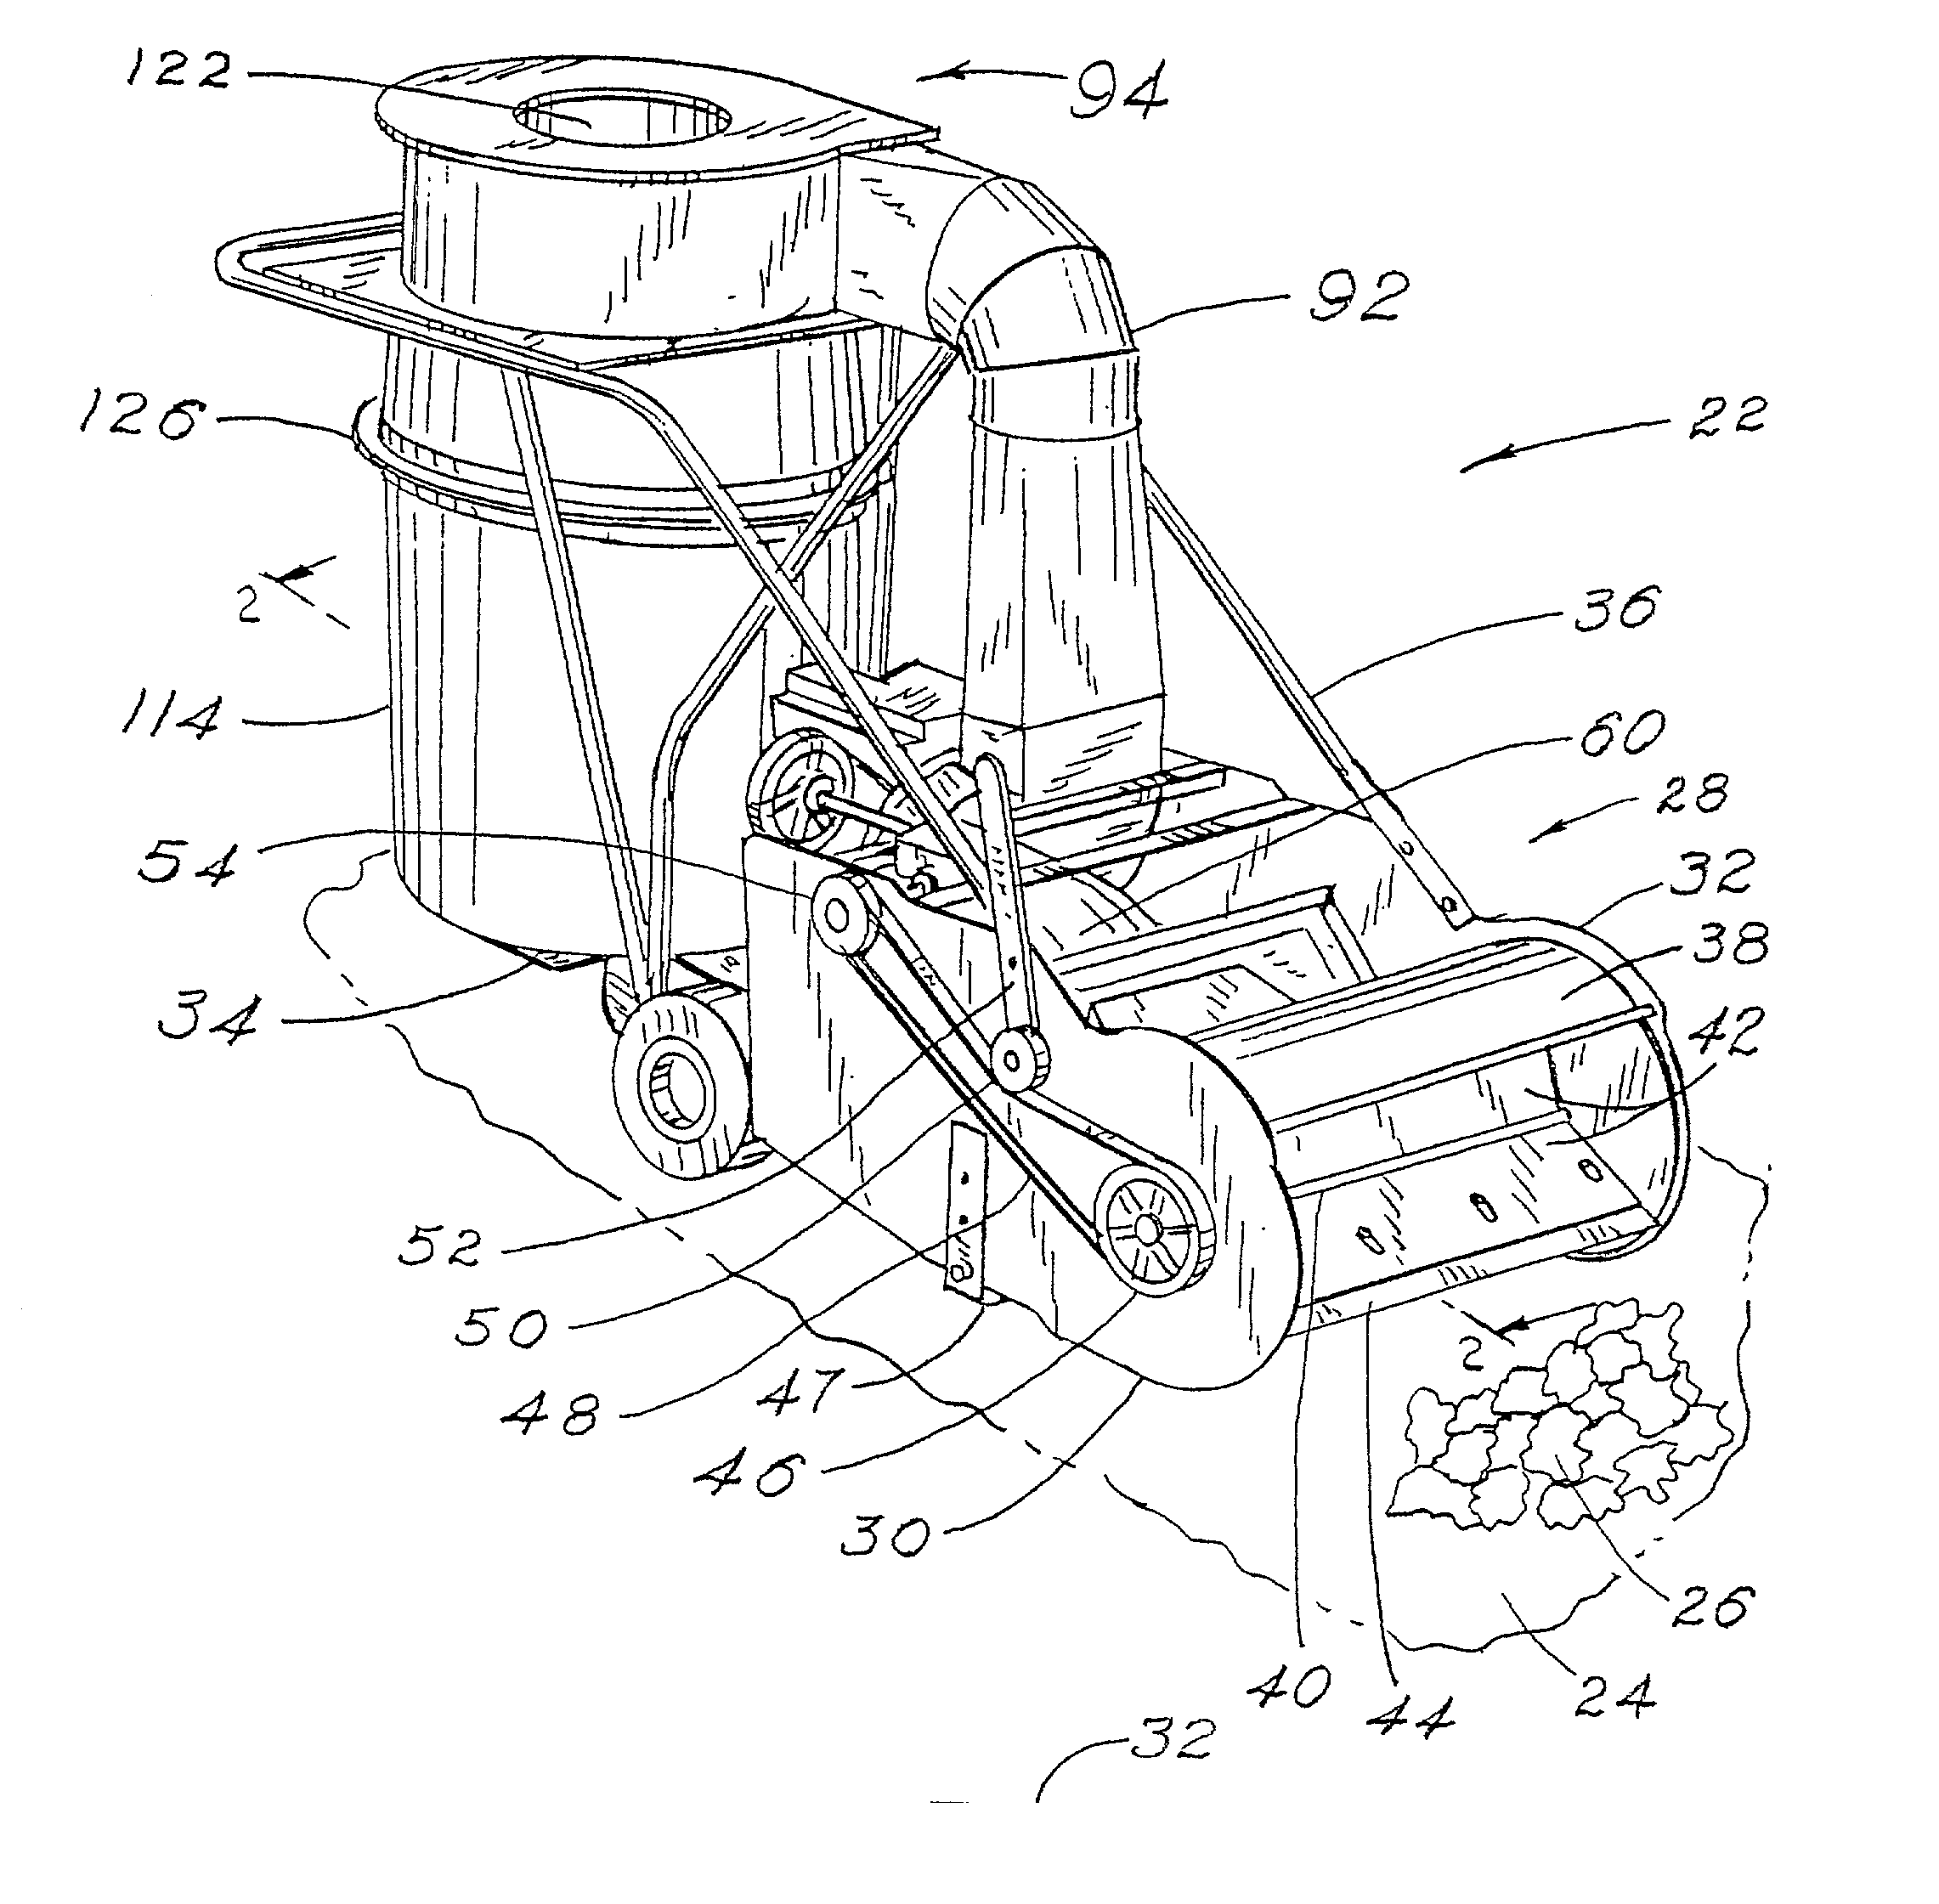 Collector and separator apparatus for lawn and garden